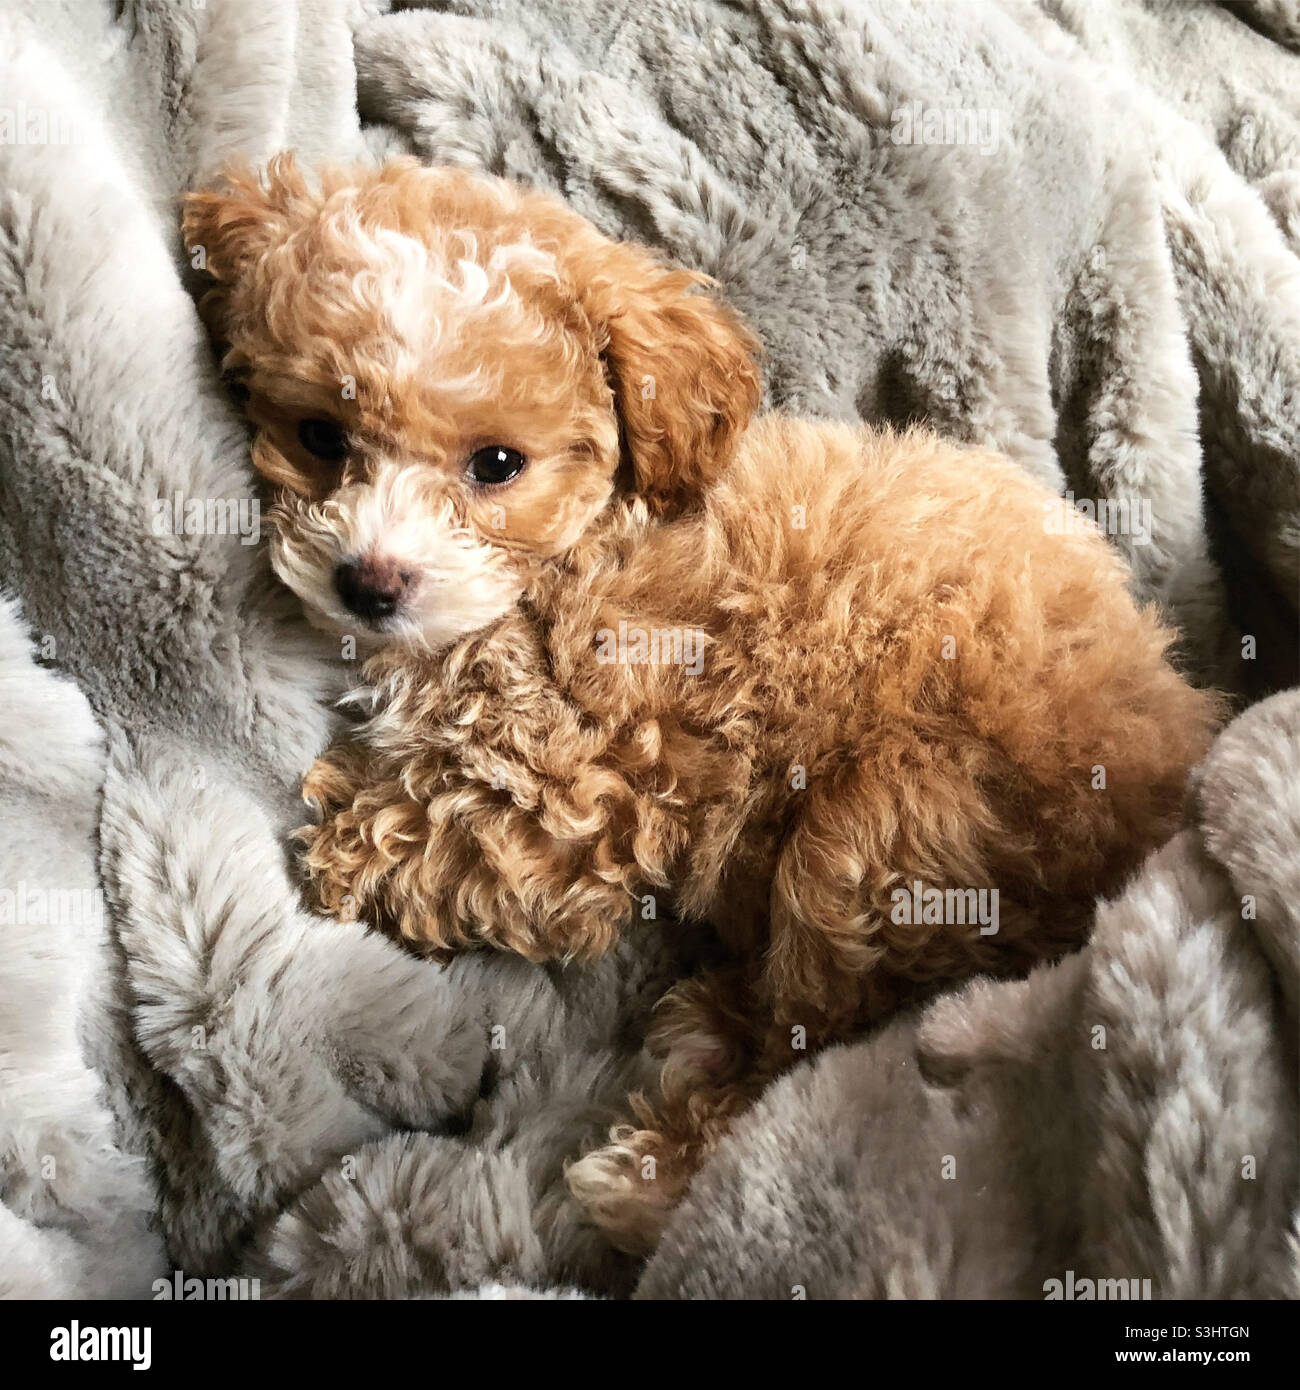 Cute Maltipoo puppy lays cuddled up on soft fuzzy gray blanket. Stock Photo